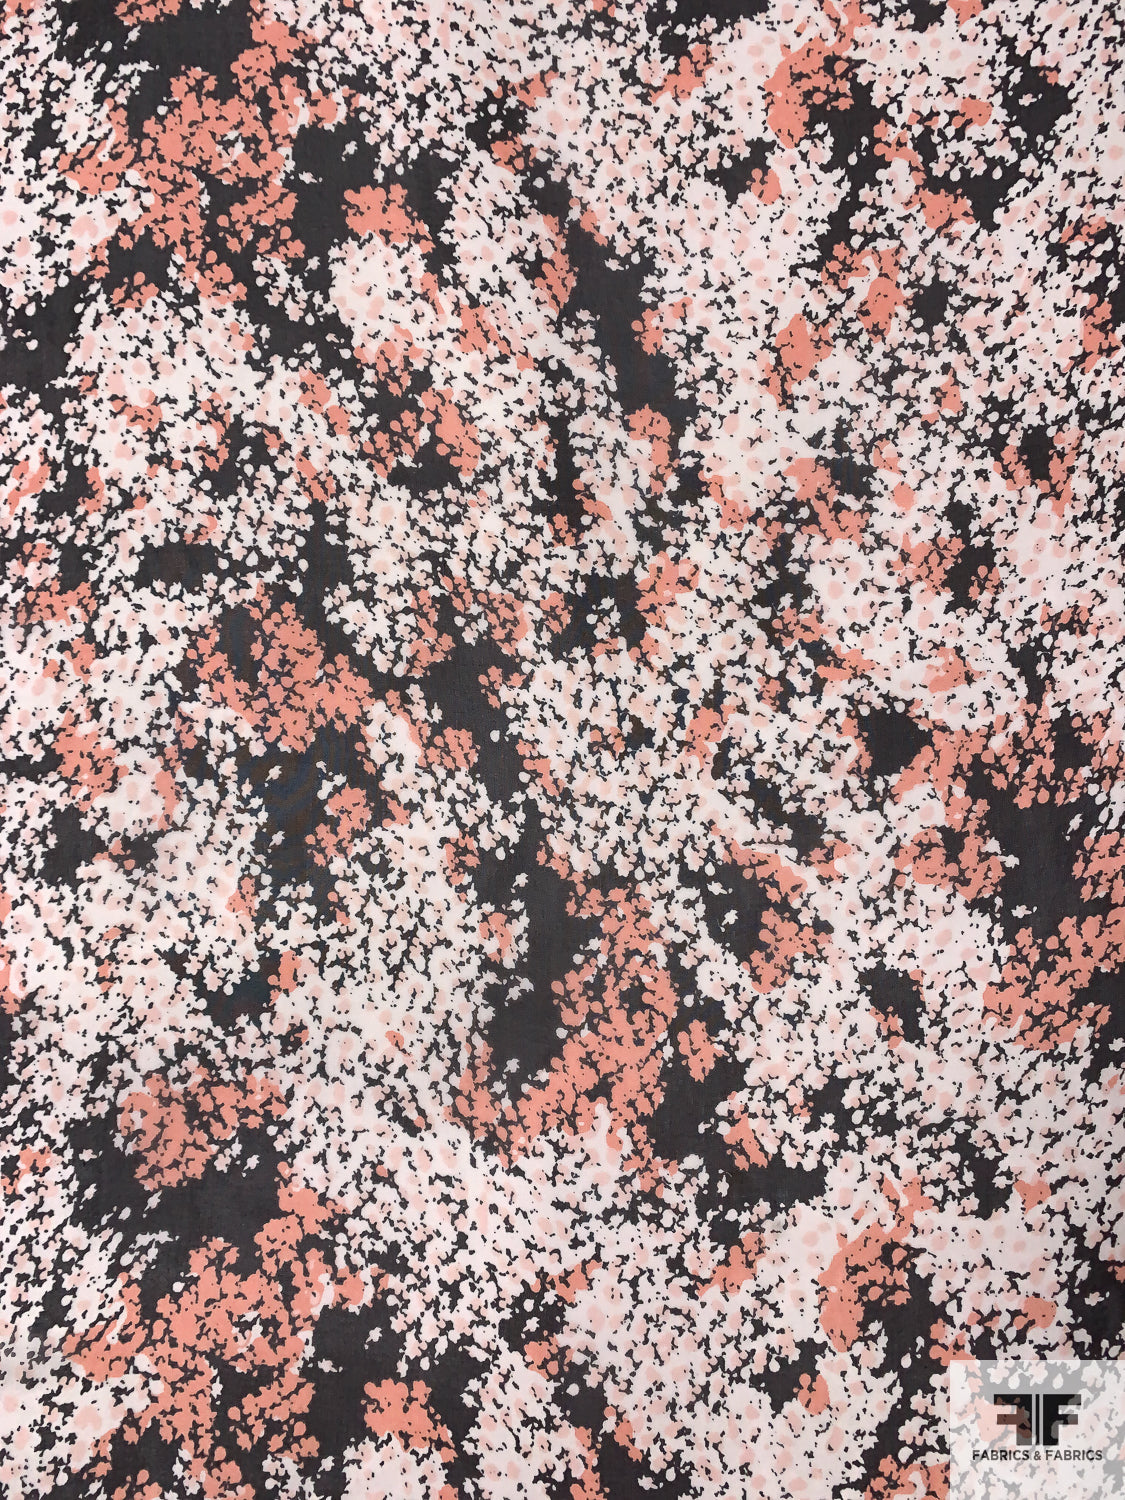 Splatter Clustered Ditsy Floral Silhouette Printed Silk Chiffon - Salmon Pink / Off-White / Black